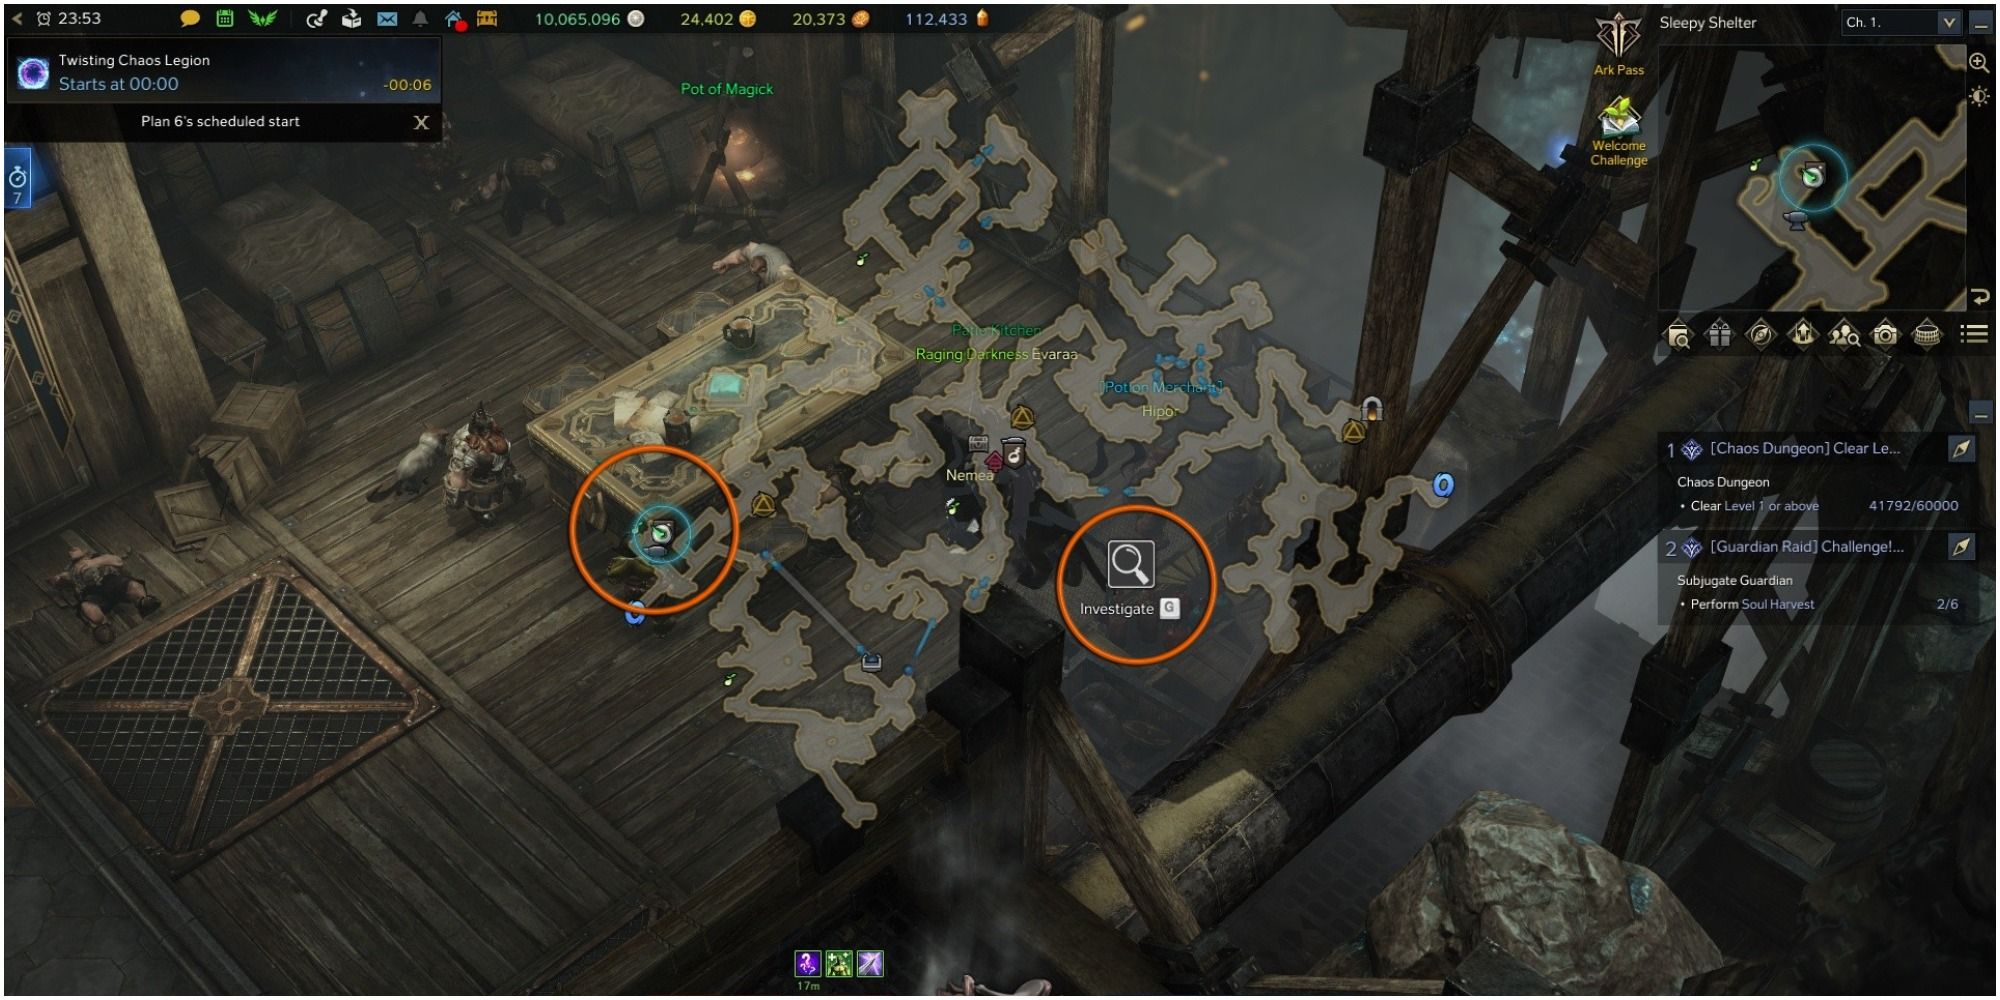 Lost Ark Yorn's Hidden Story 1-2 location with mini-map open, orange circle around object and player icon